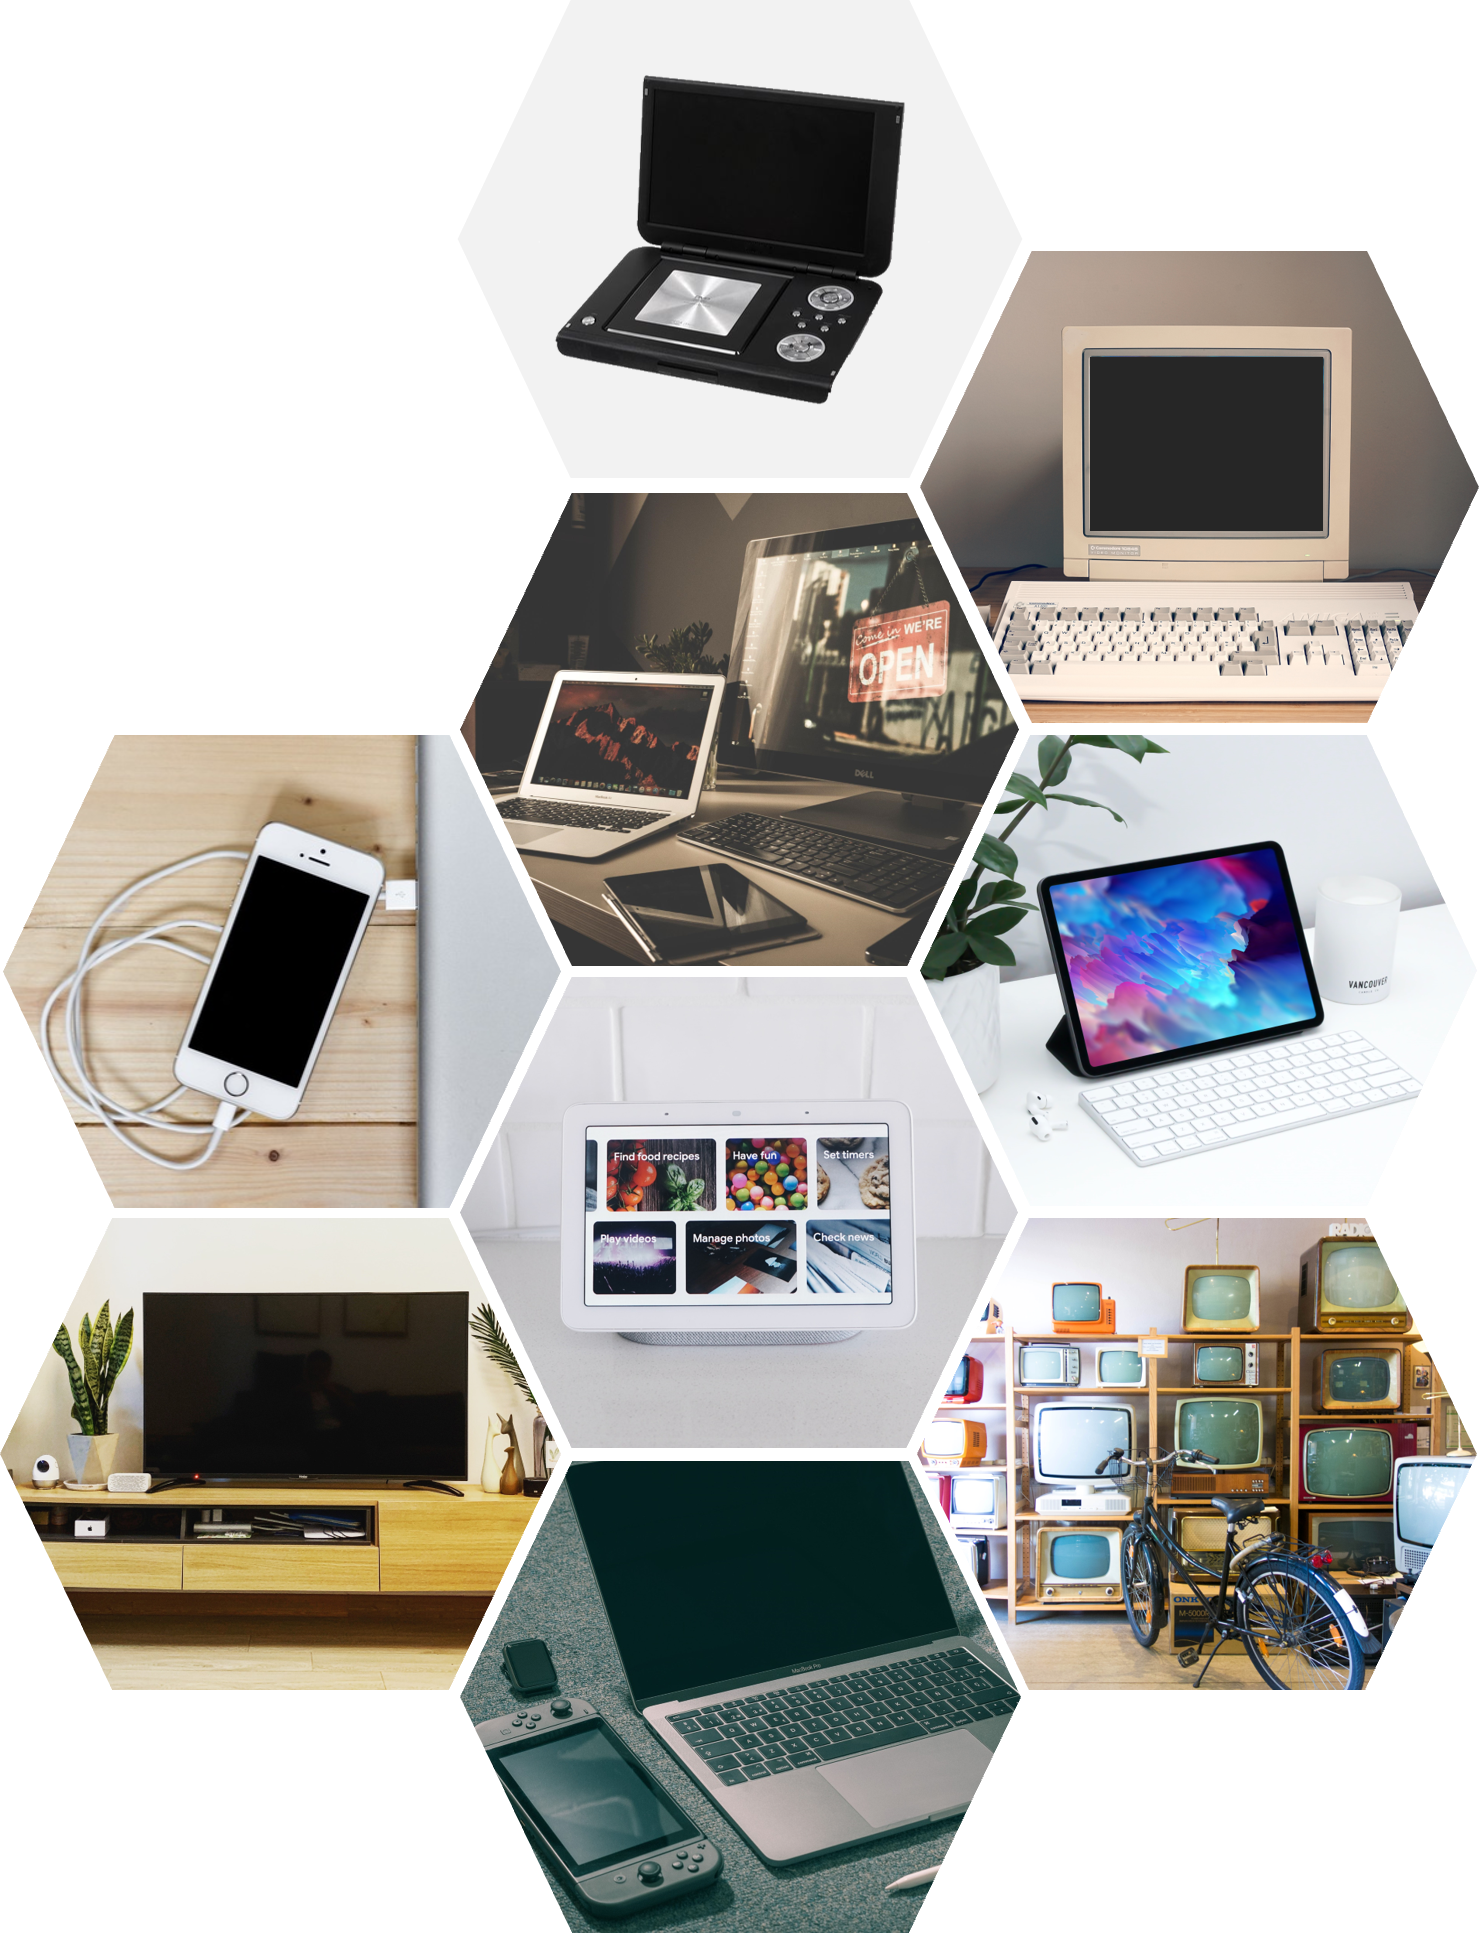 Examples of electronic devices: portable DVD player, Old desktop computer with CRT-containing monitor, LCD or OLED-containing desktop monitor, LCD or OLED-containing laptop computer, LCD or OLED-containing tablets, smart display, cell phone, LCD-containing television, gaming device, CRT-containing televisions.